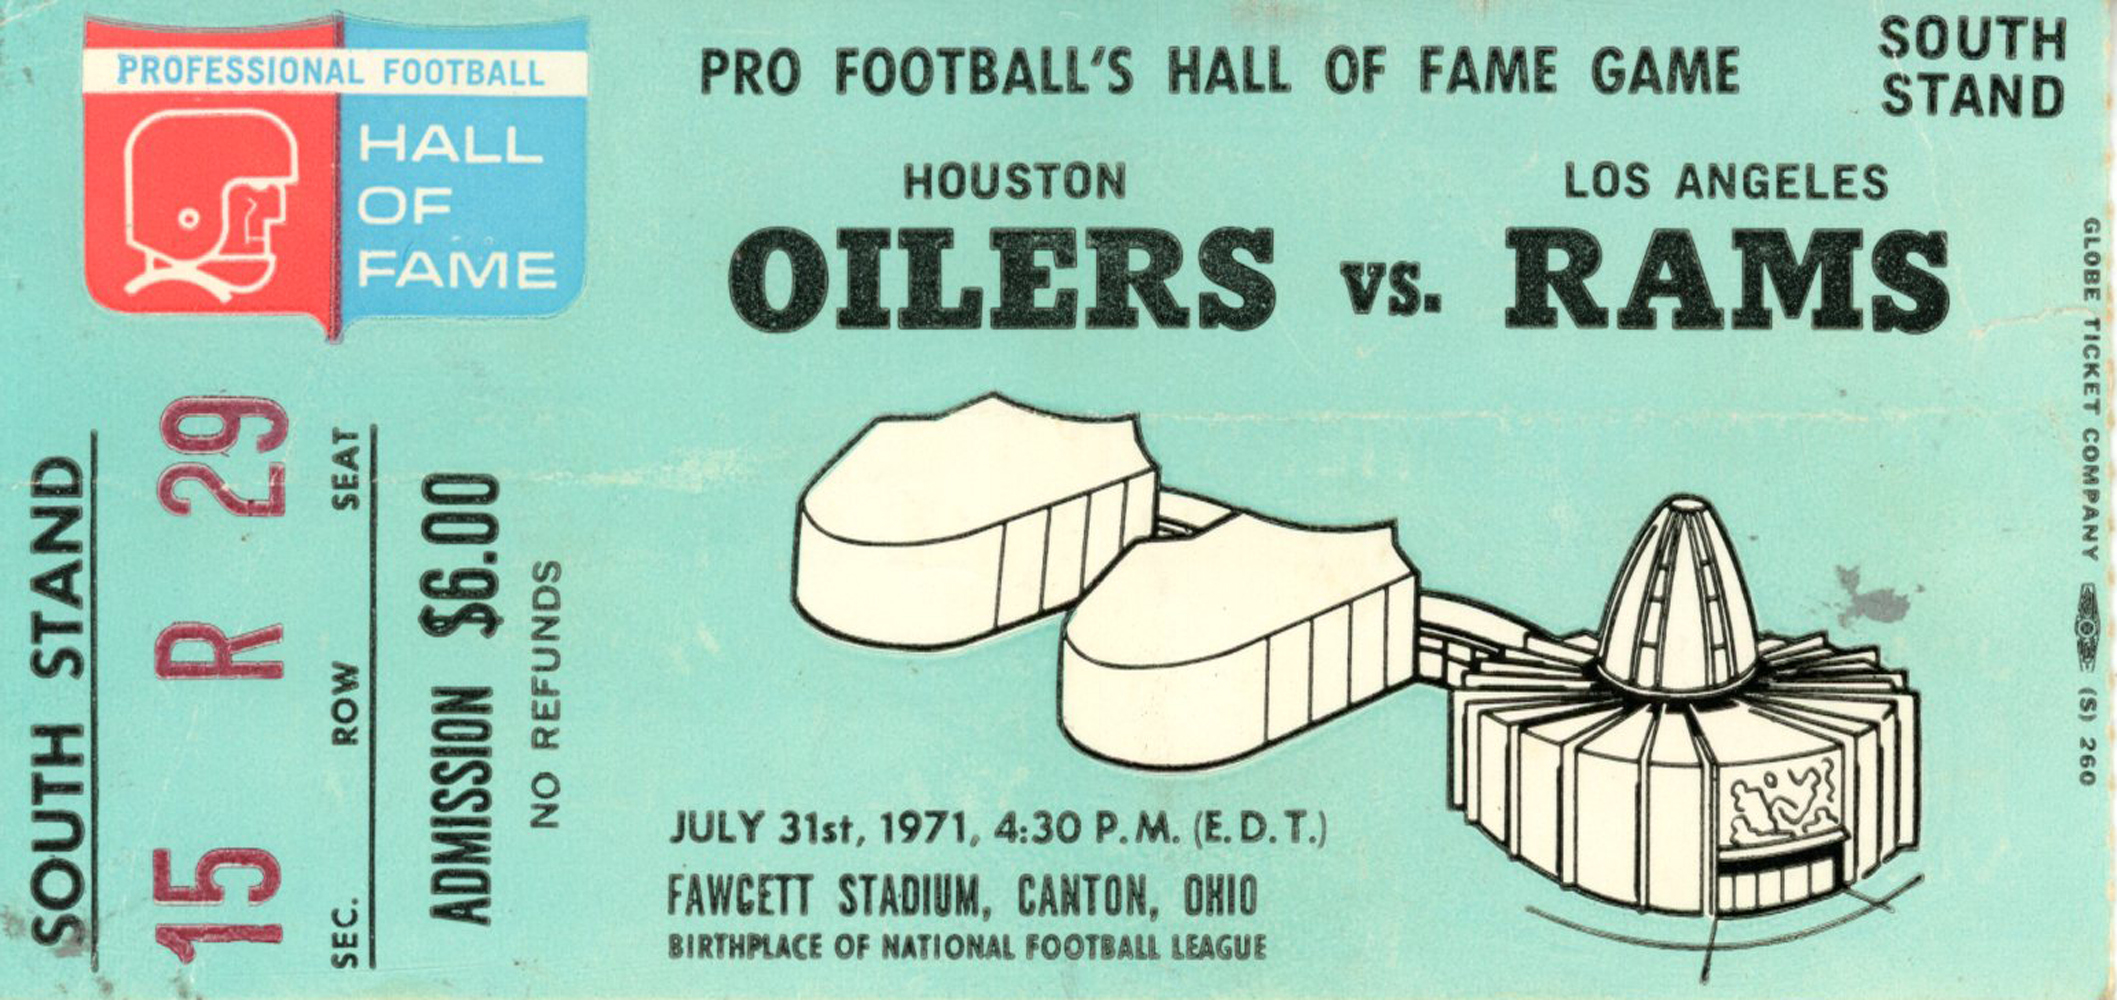 1971 Hall Of Fame Game Ticket Houston Oilers vs Los Angeles Rams